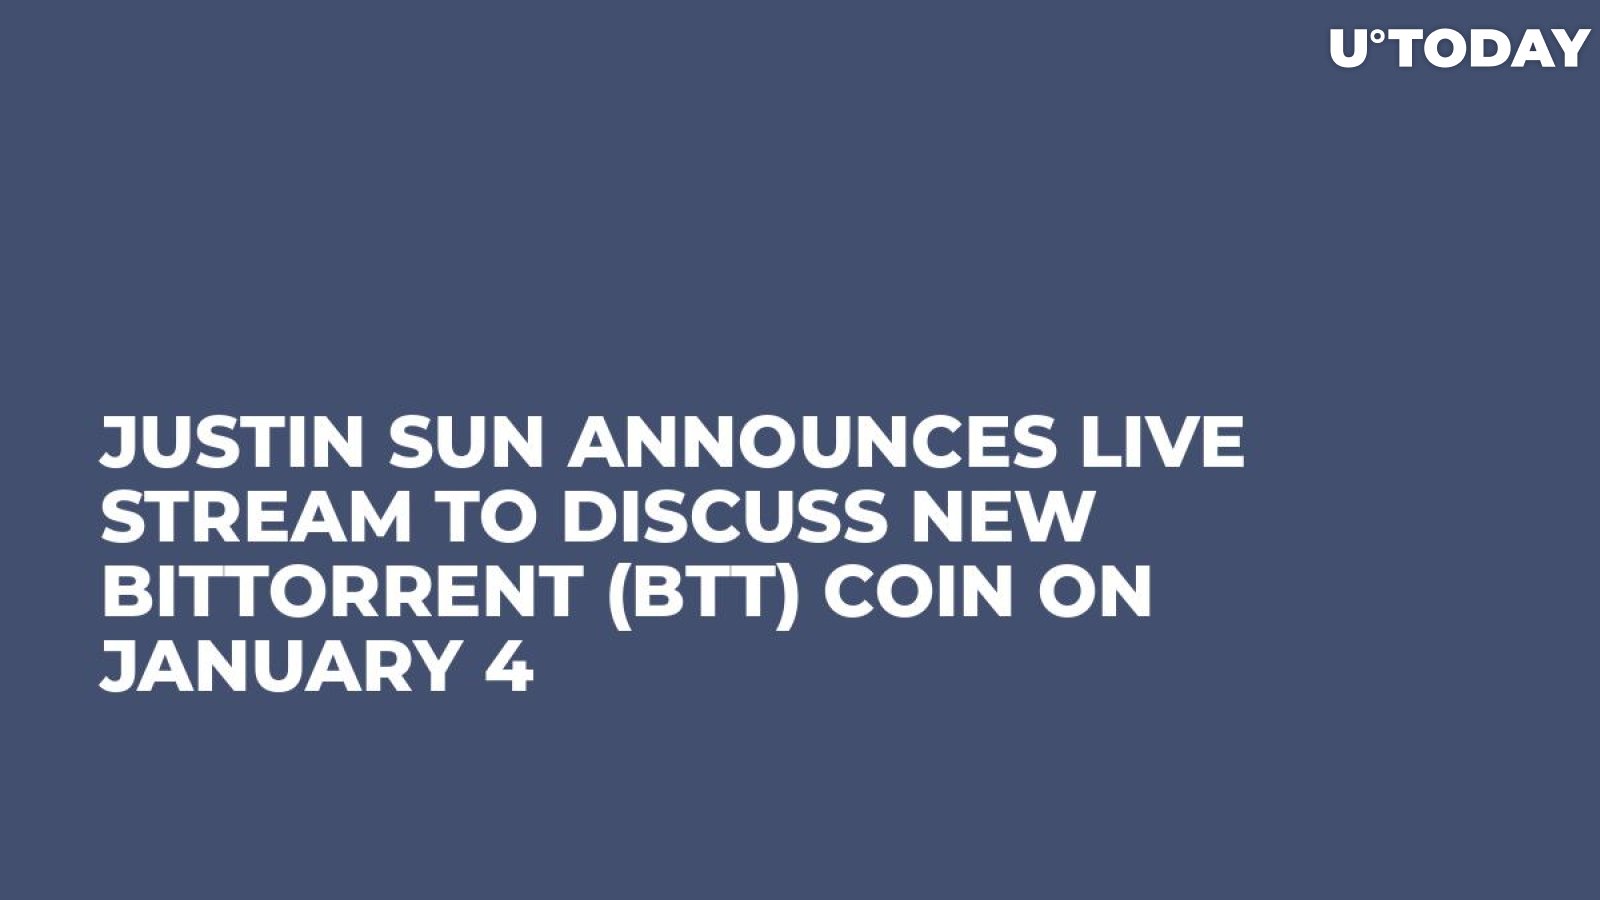 Justin Sun Announces Live Stream to Discuss New BitTorrent (BTT) Coin on January 4